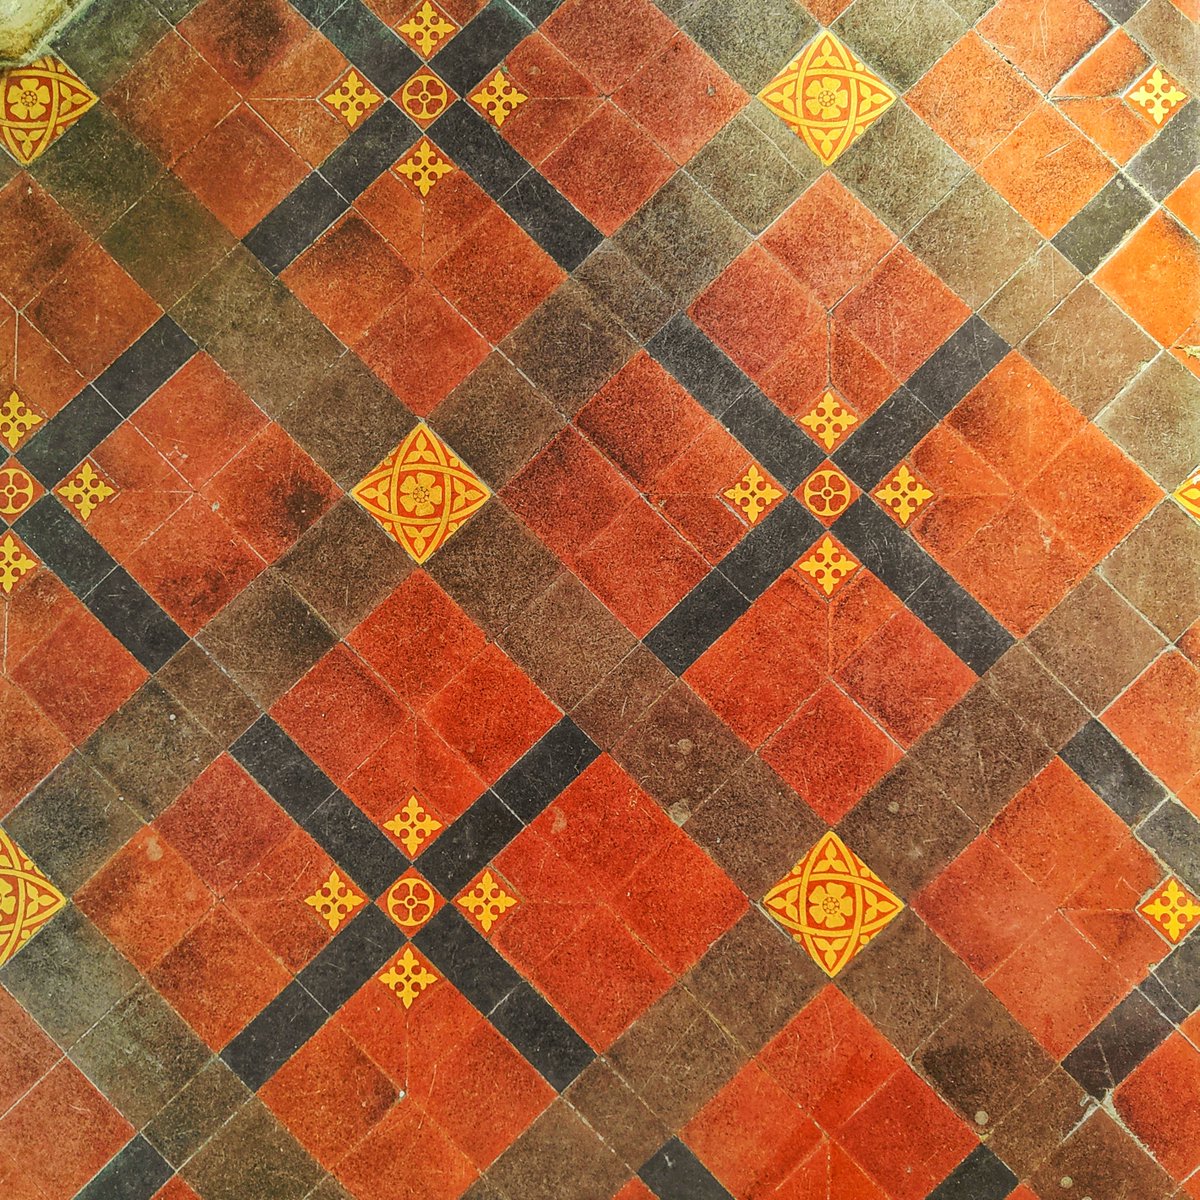 #TilesOnTuesday
Thriplow